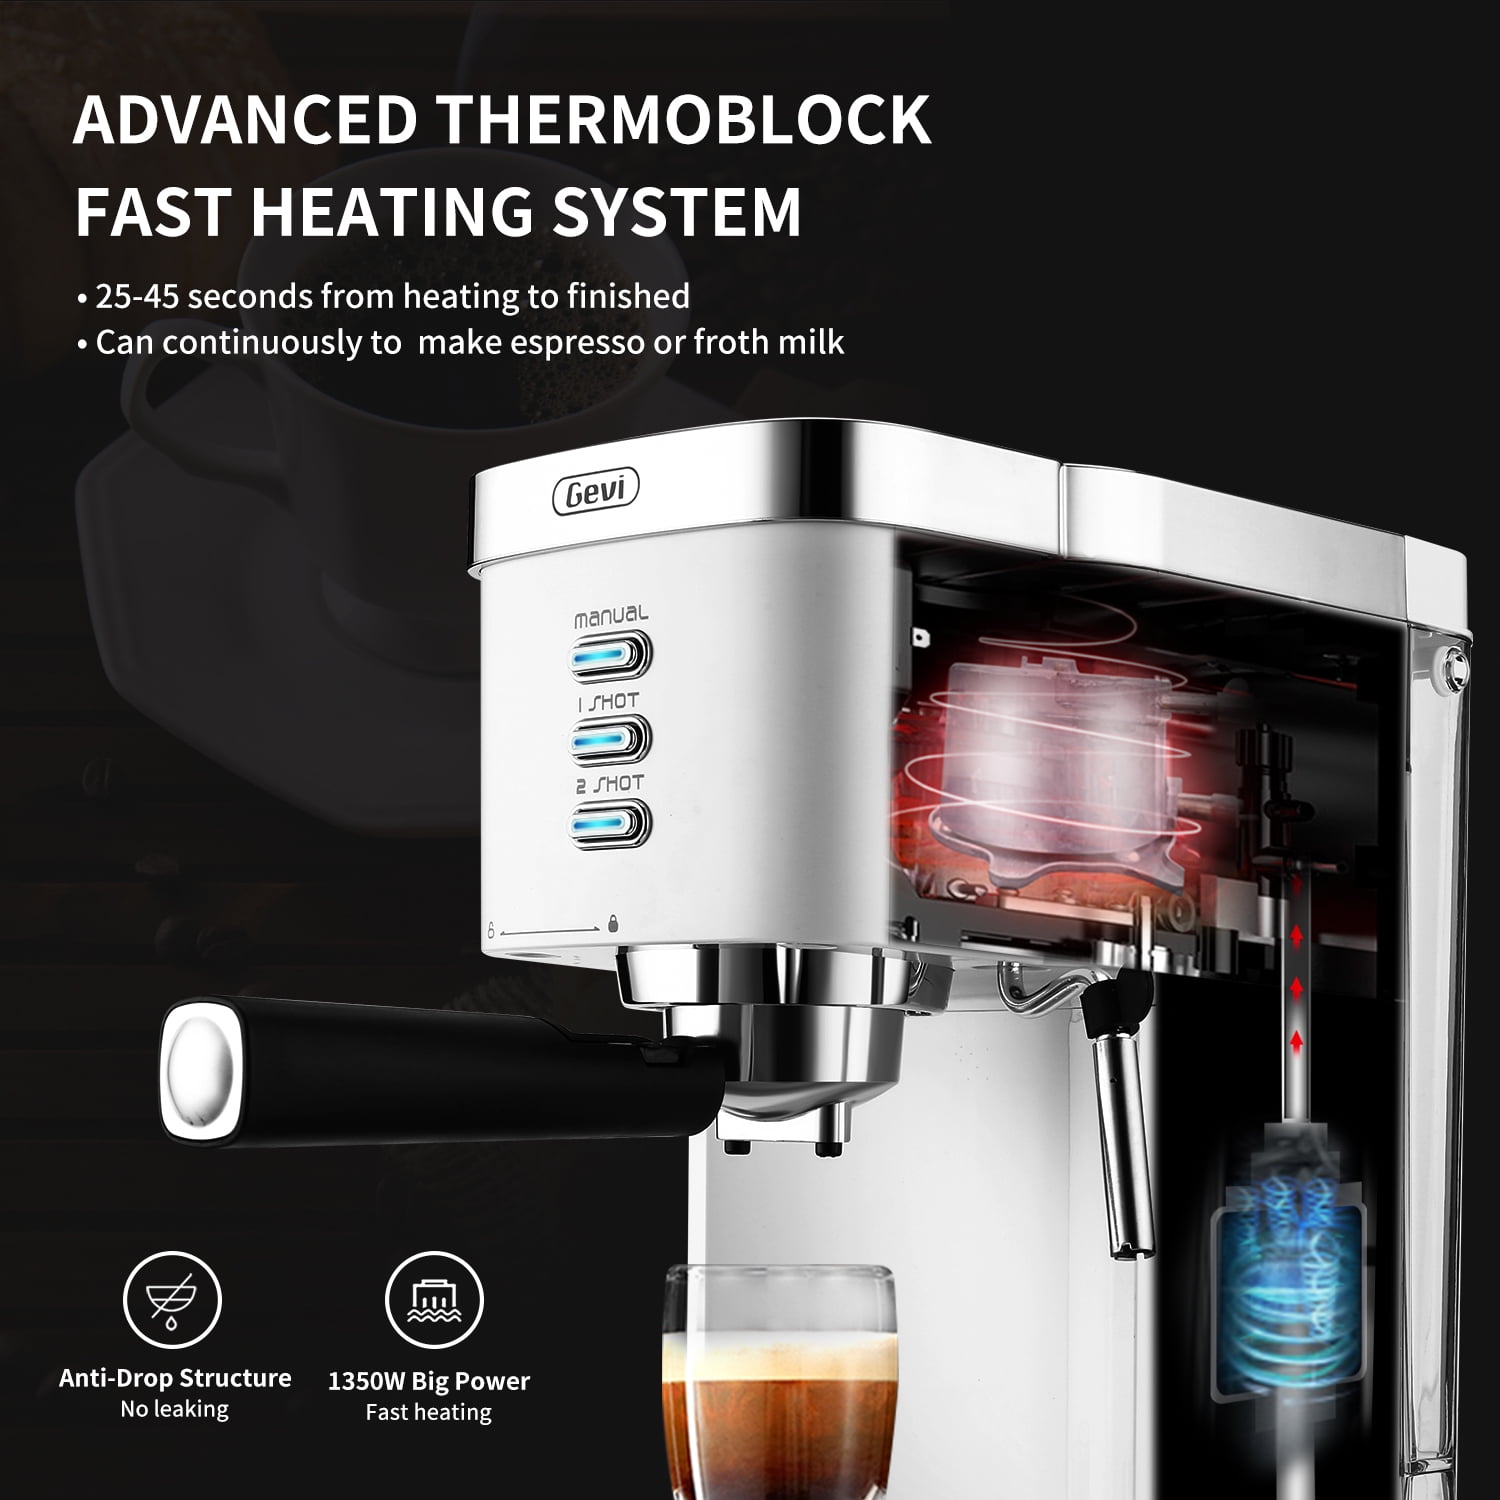 Double Temperature Control System Latte and Mocha 1.2 L Water Tank Espresso Machines Fast Heating Cappuccino Machine 20 Bar with Milk Frother for Espresso White for Home Barista 1350W